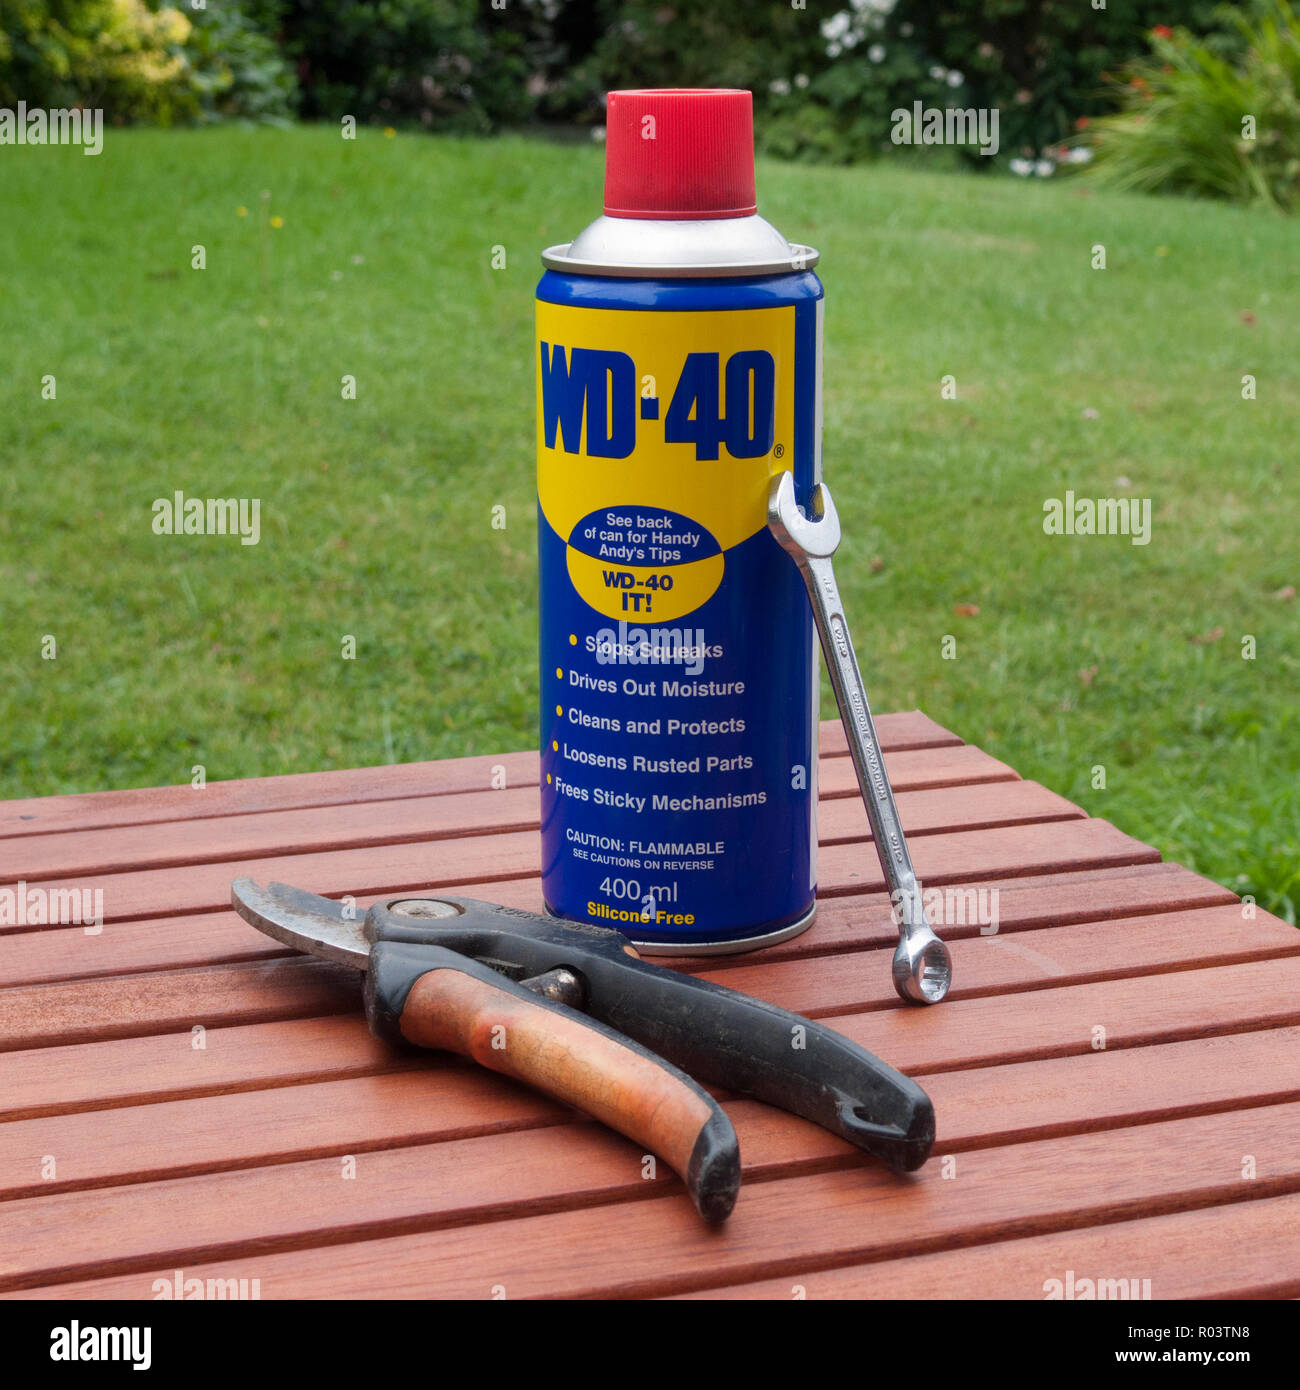 Aerosol Can of WD-40 Lubricant Spray With Secateurs and a Spanner, UK Stock Photo